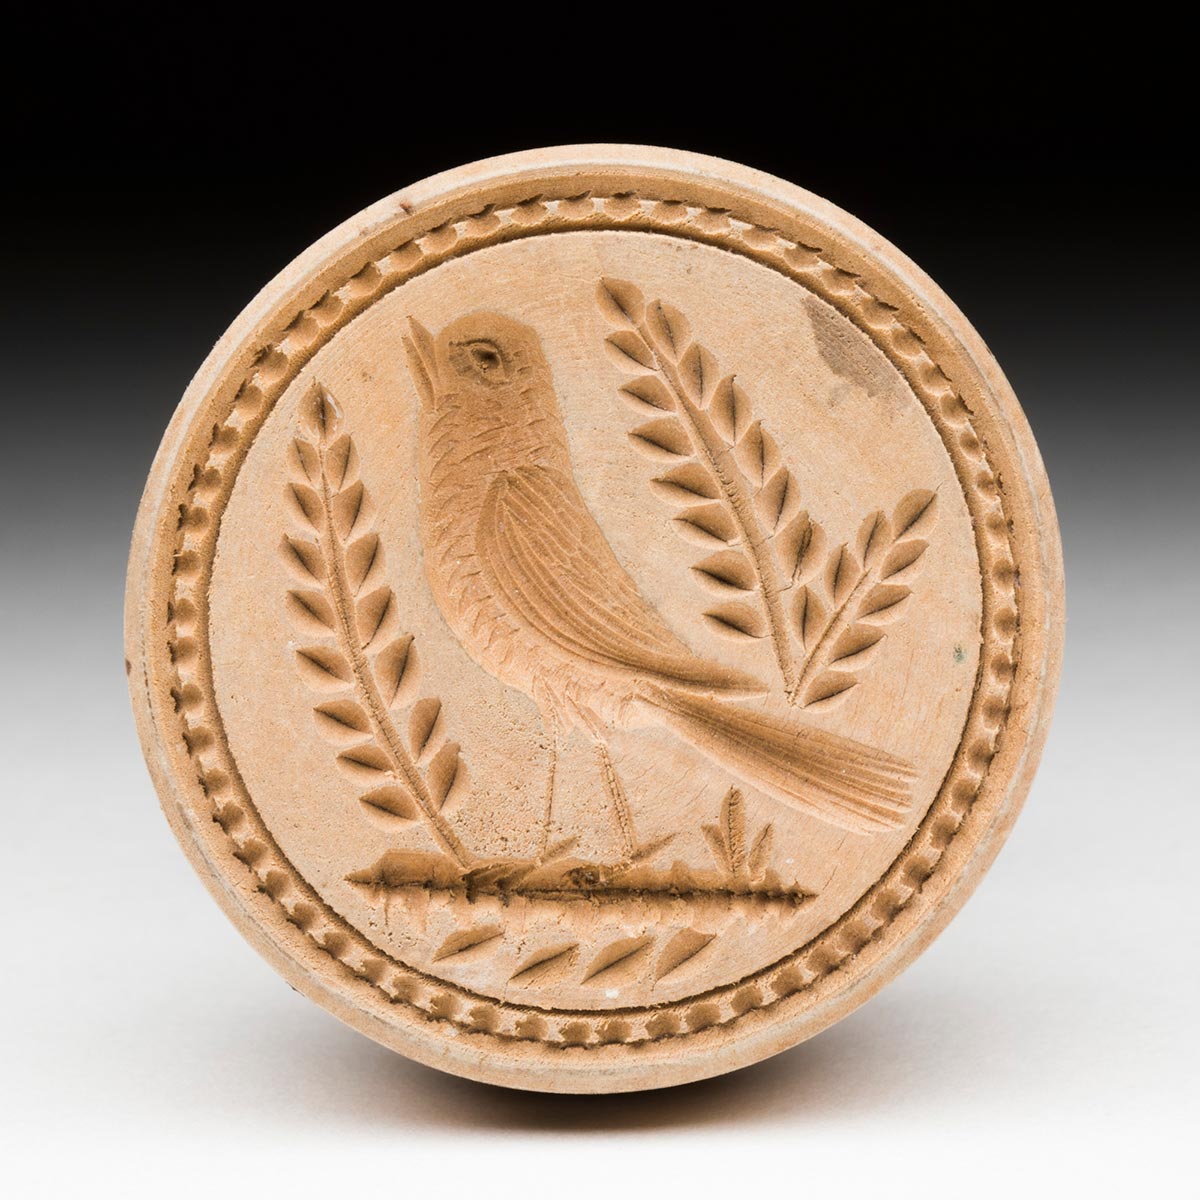 Round shortbread stamp, with wheat bushel pattern of a bird and leaves.